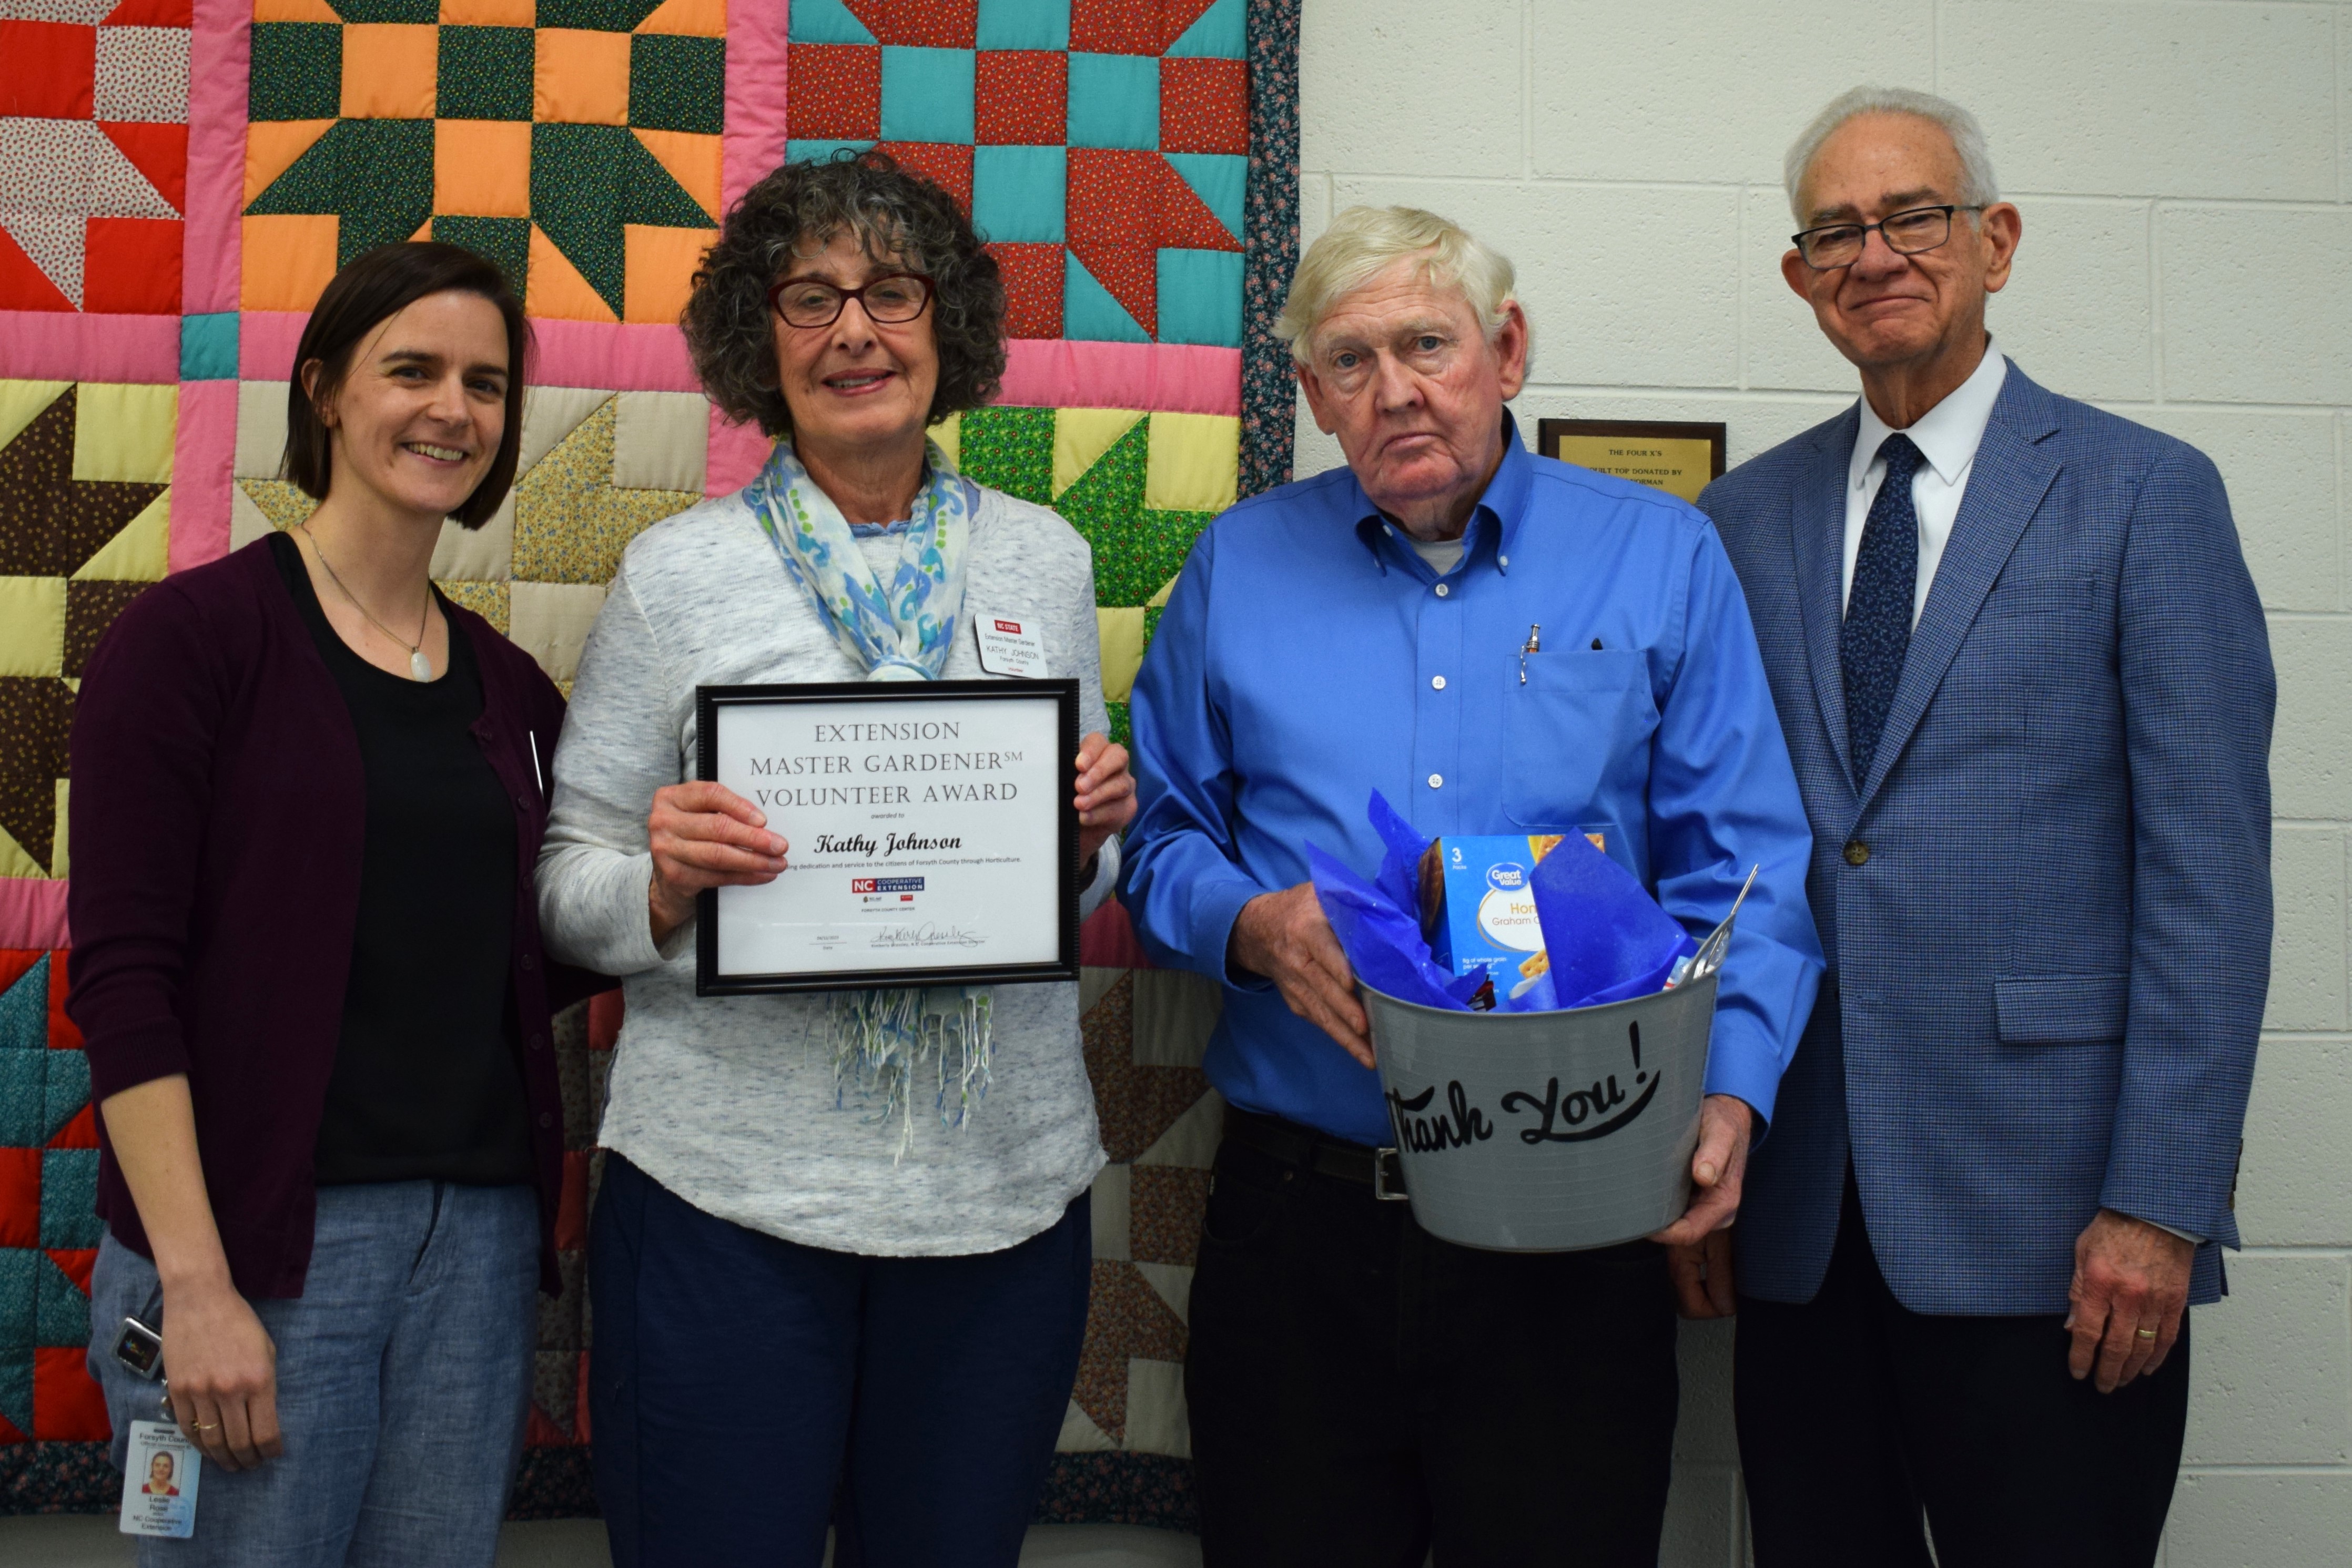 EMG Volunteer Award Recipient, Kathy Johnson with Horticulture Agent, Leslie Rose, and Forsyth County Commissioners Richard Linville and Dr. Don Martin